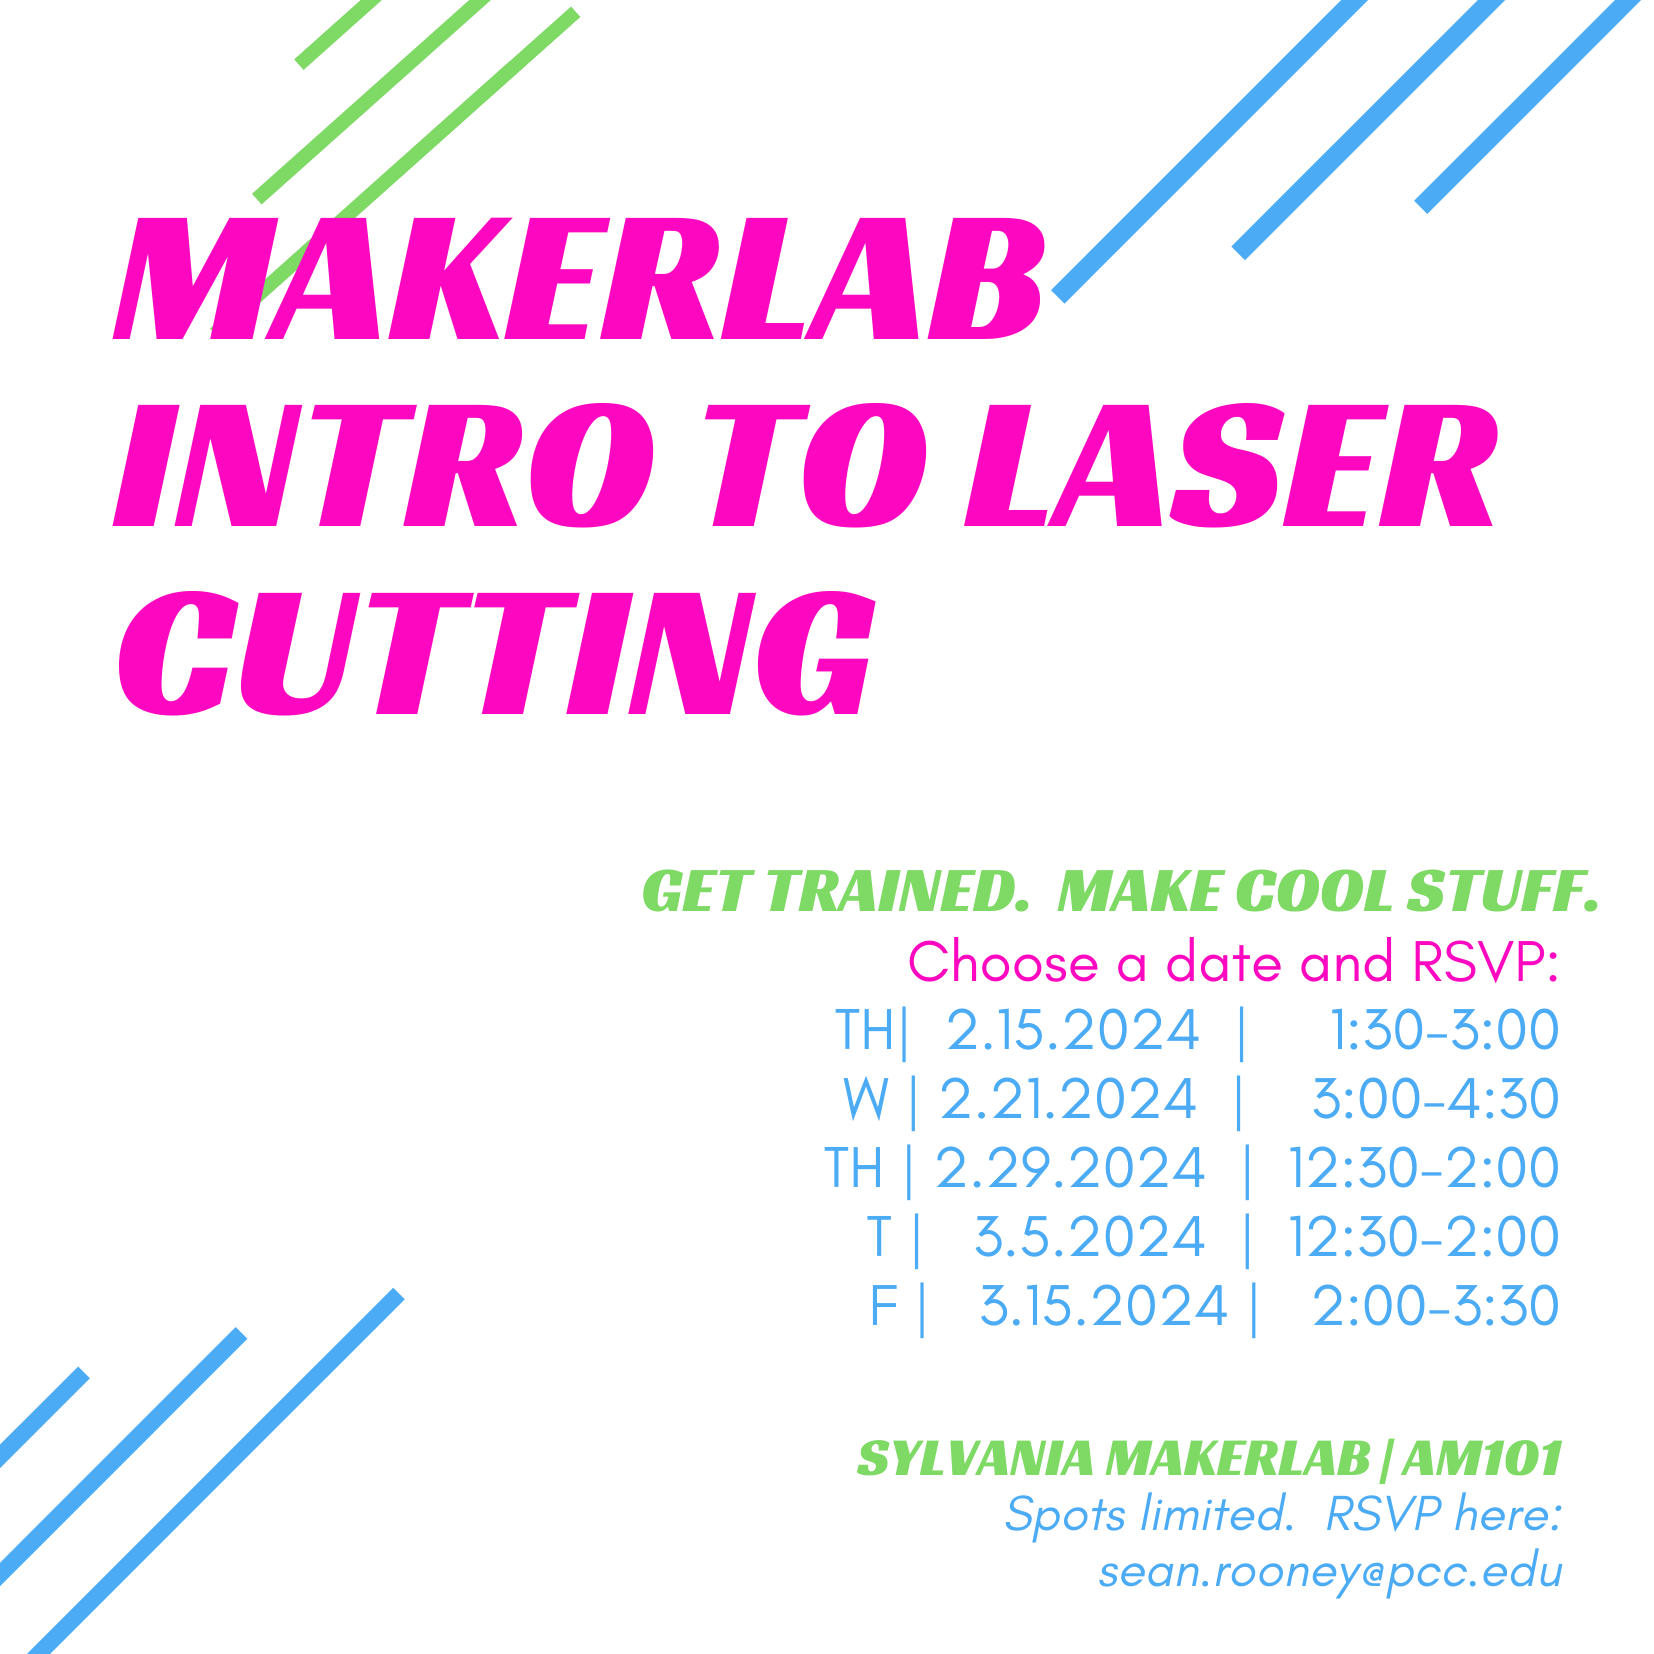 MakerLab Training:  Intro to Laser Cutting
Get Trained. Make Cool Stuff.
Choose a date and RSVP:
TH  11.9.2023 1:00-2:30 PM
TH  11.16.2023 12:30-2:00 PM
Wed 11.29.2023 3:00-4:30 PM
Tues 12.5.2023 2:00 – 3:30 PM
Location: Sylvania MakerLab | AM101
Spots limited. RSVP here: sean.rooney@pcc.edu